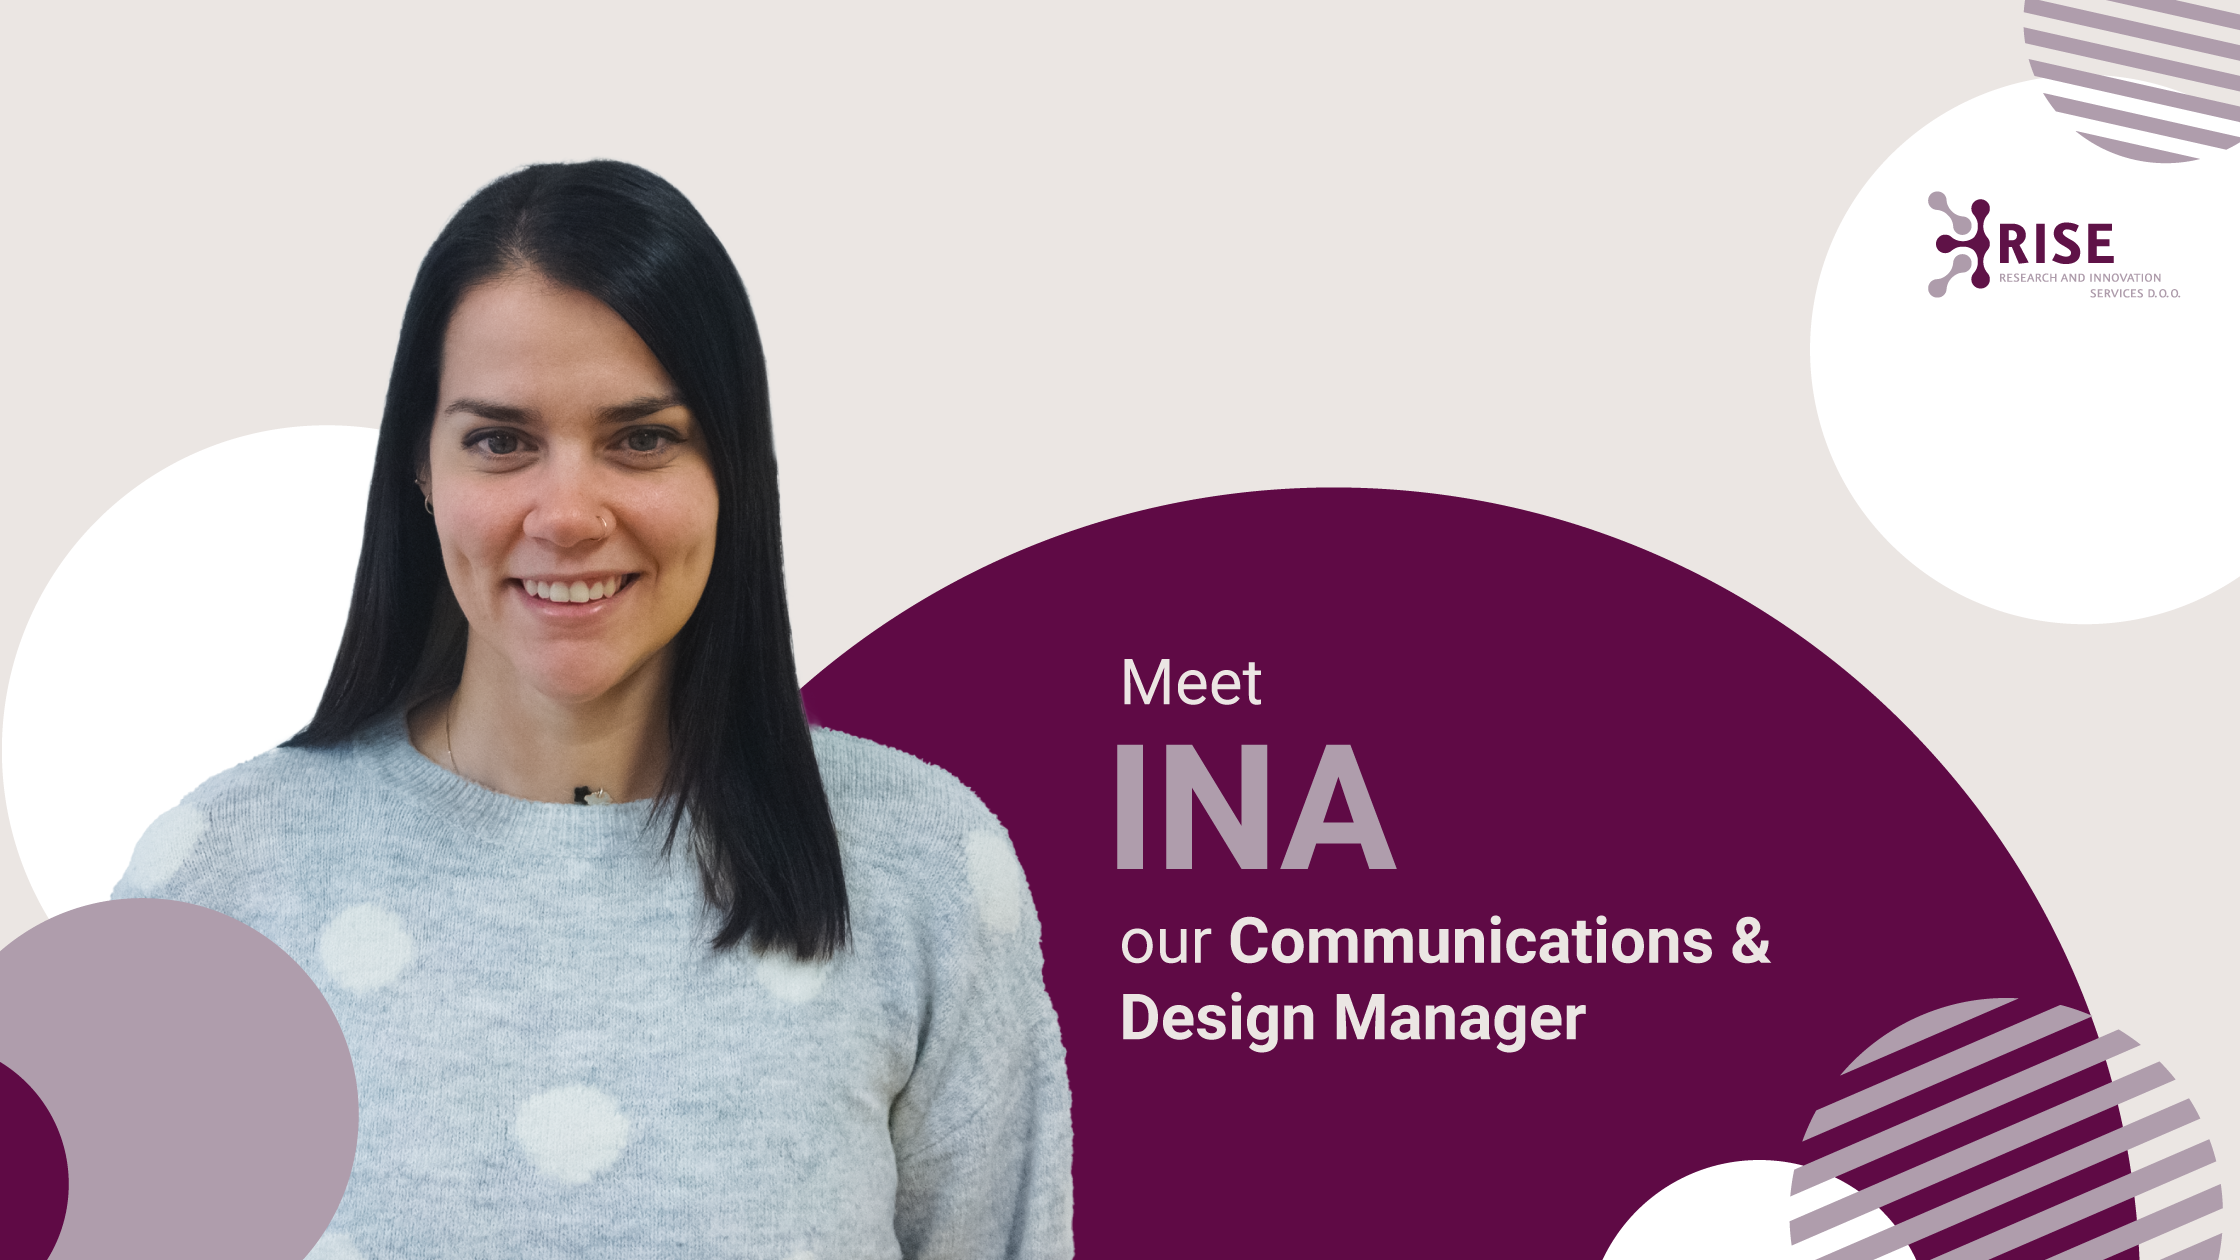 Ina_Communications&Design-Manager-RISE